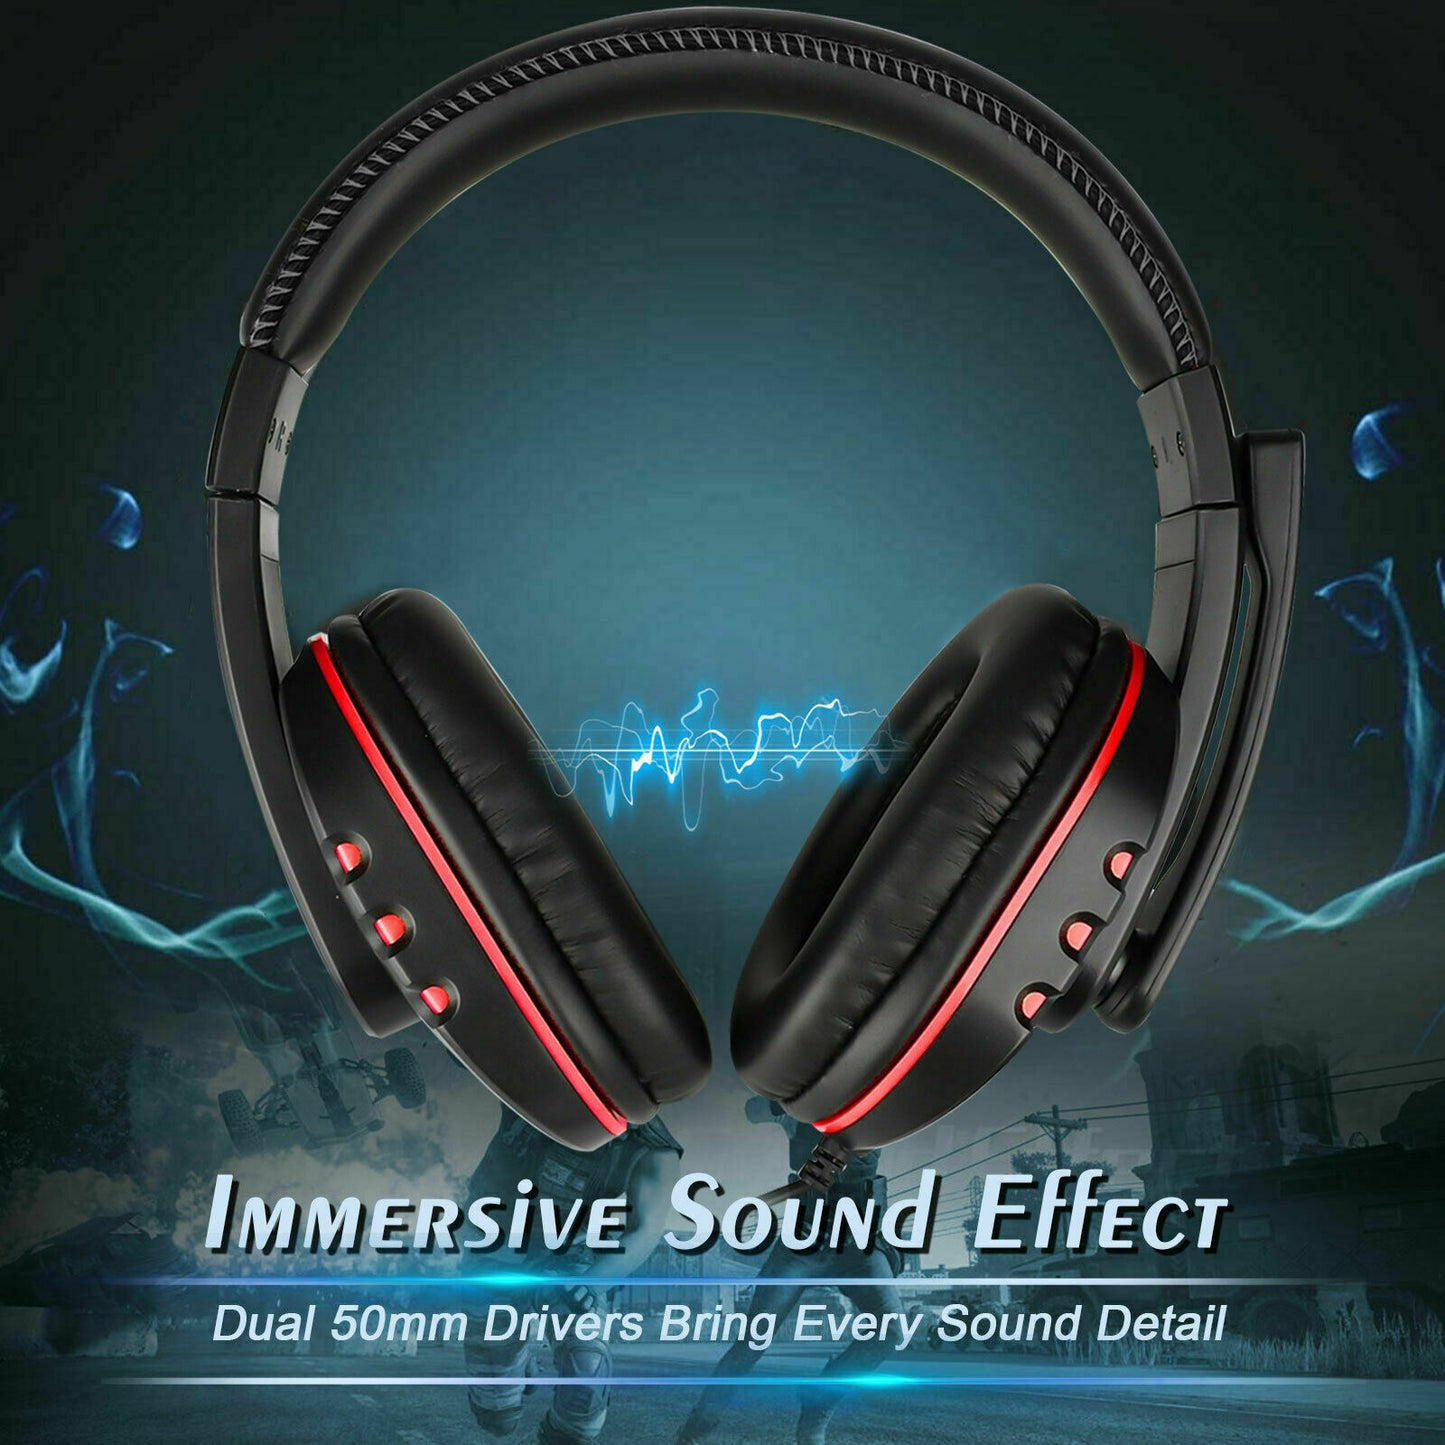 Pro Gamer Headphones - Headset for PS4, PlayStation 4, PC, Computer